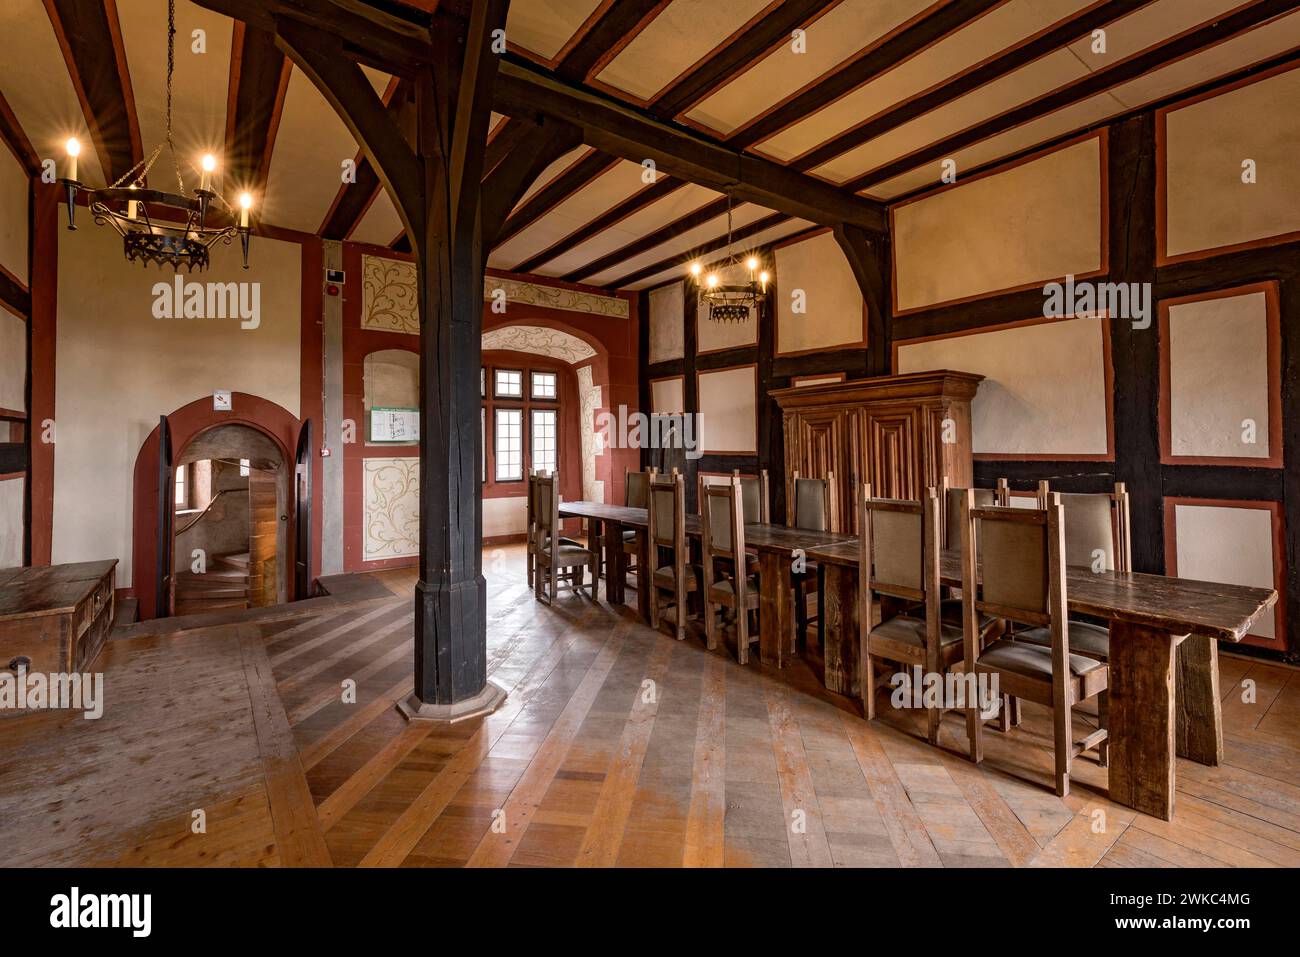 Junkernstube, long solid wooden table for young gentlemen, chandelier, Rieneckische Gemaecher, knight's castle from the Middle Ages, Ronneburg Stock Photo